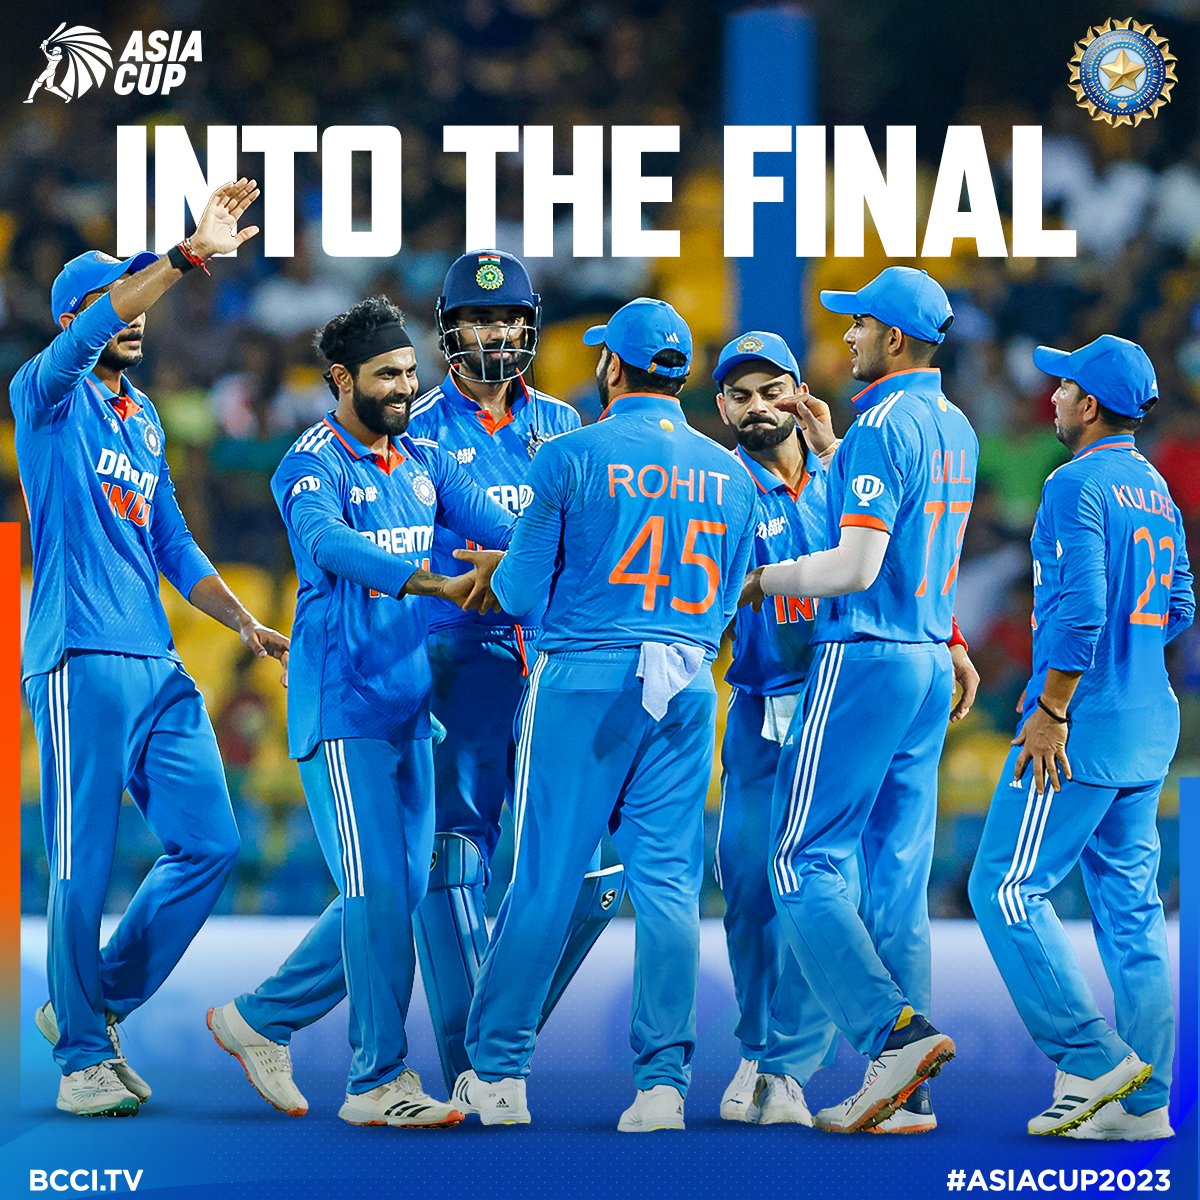 𝗧𝗵𝗿𝗼𝘂𝗴𝗵 𝘁𝗼 𝘁𝗵𝗲 𝗙𝗶𝗻𝗮𝗹! 🙌

Well done #TeamIndia 👏👏

#AsiaCup2023 | #INDvSL